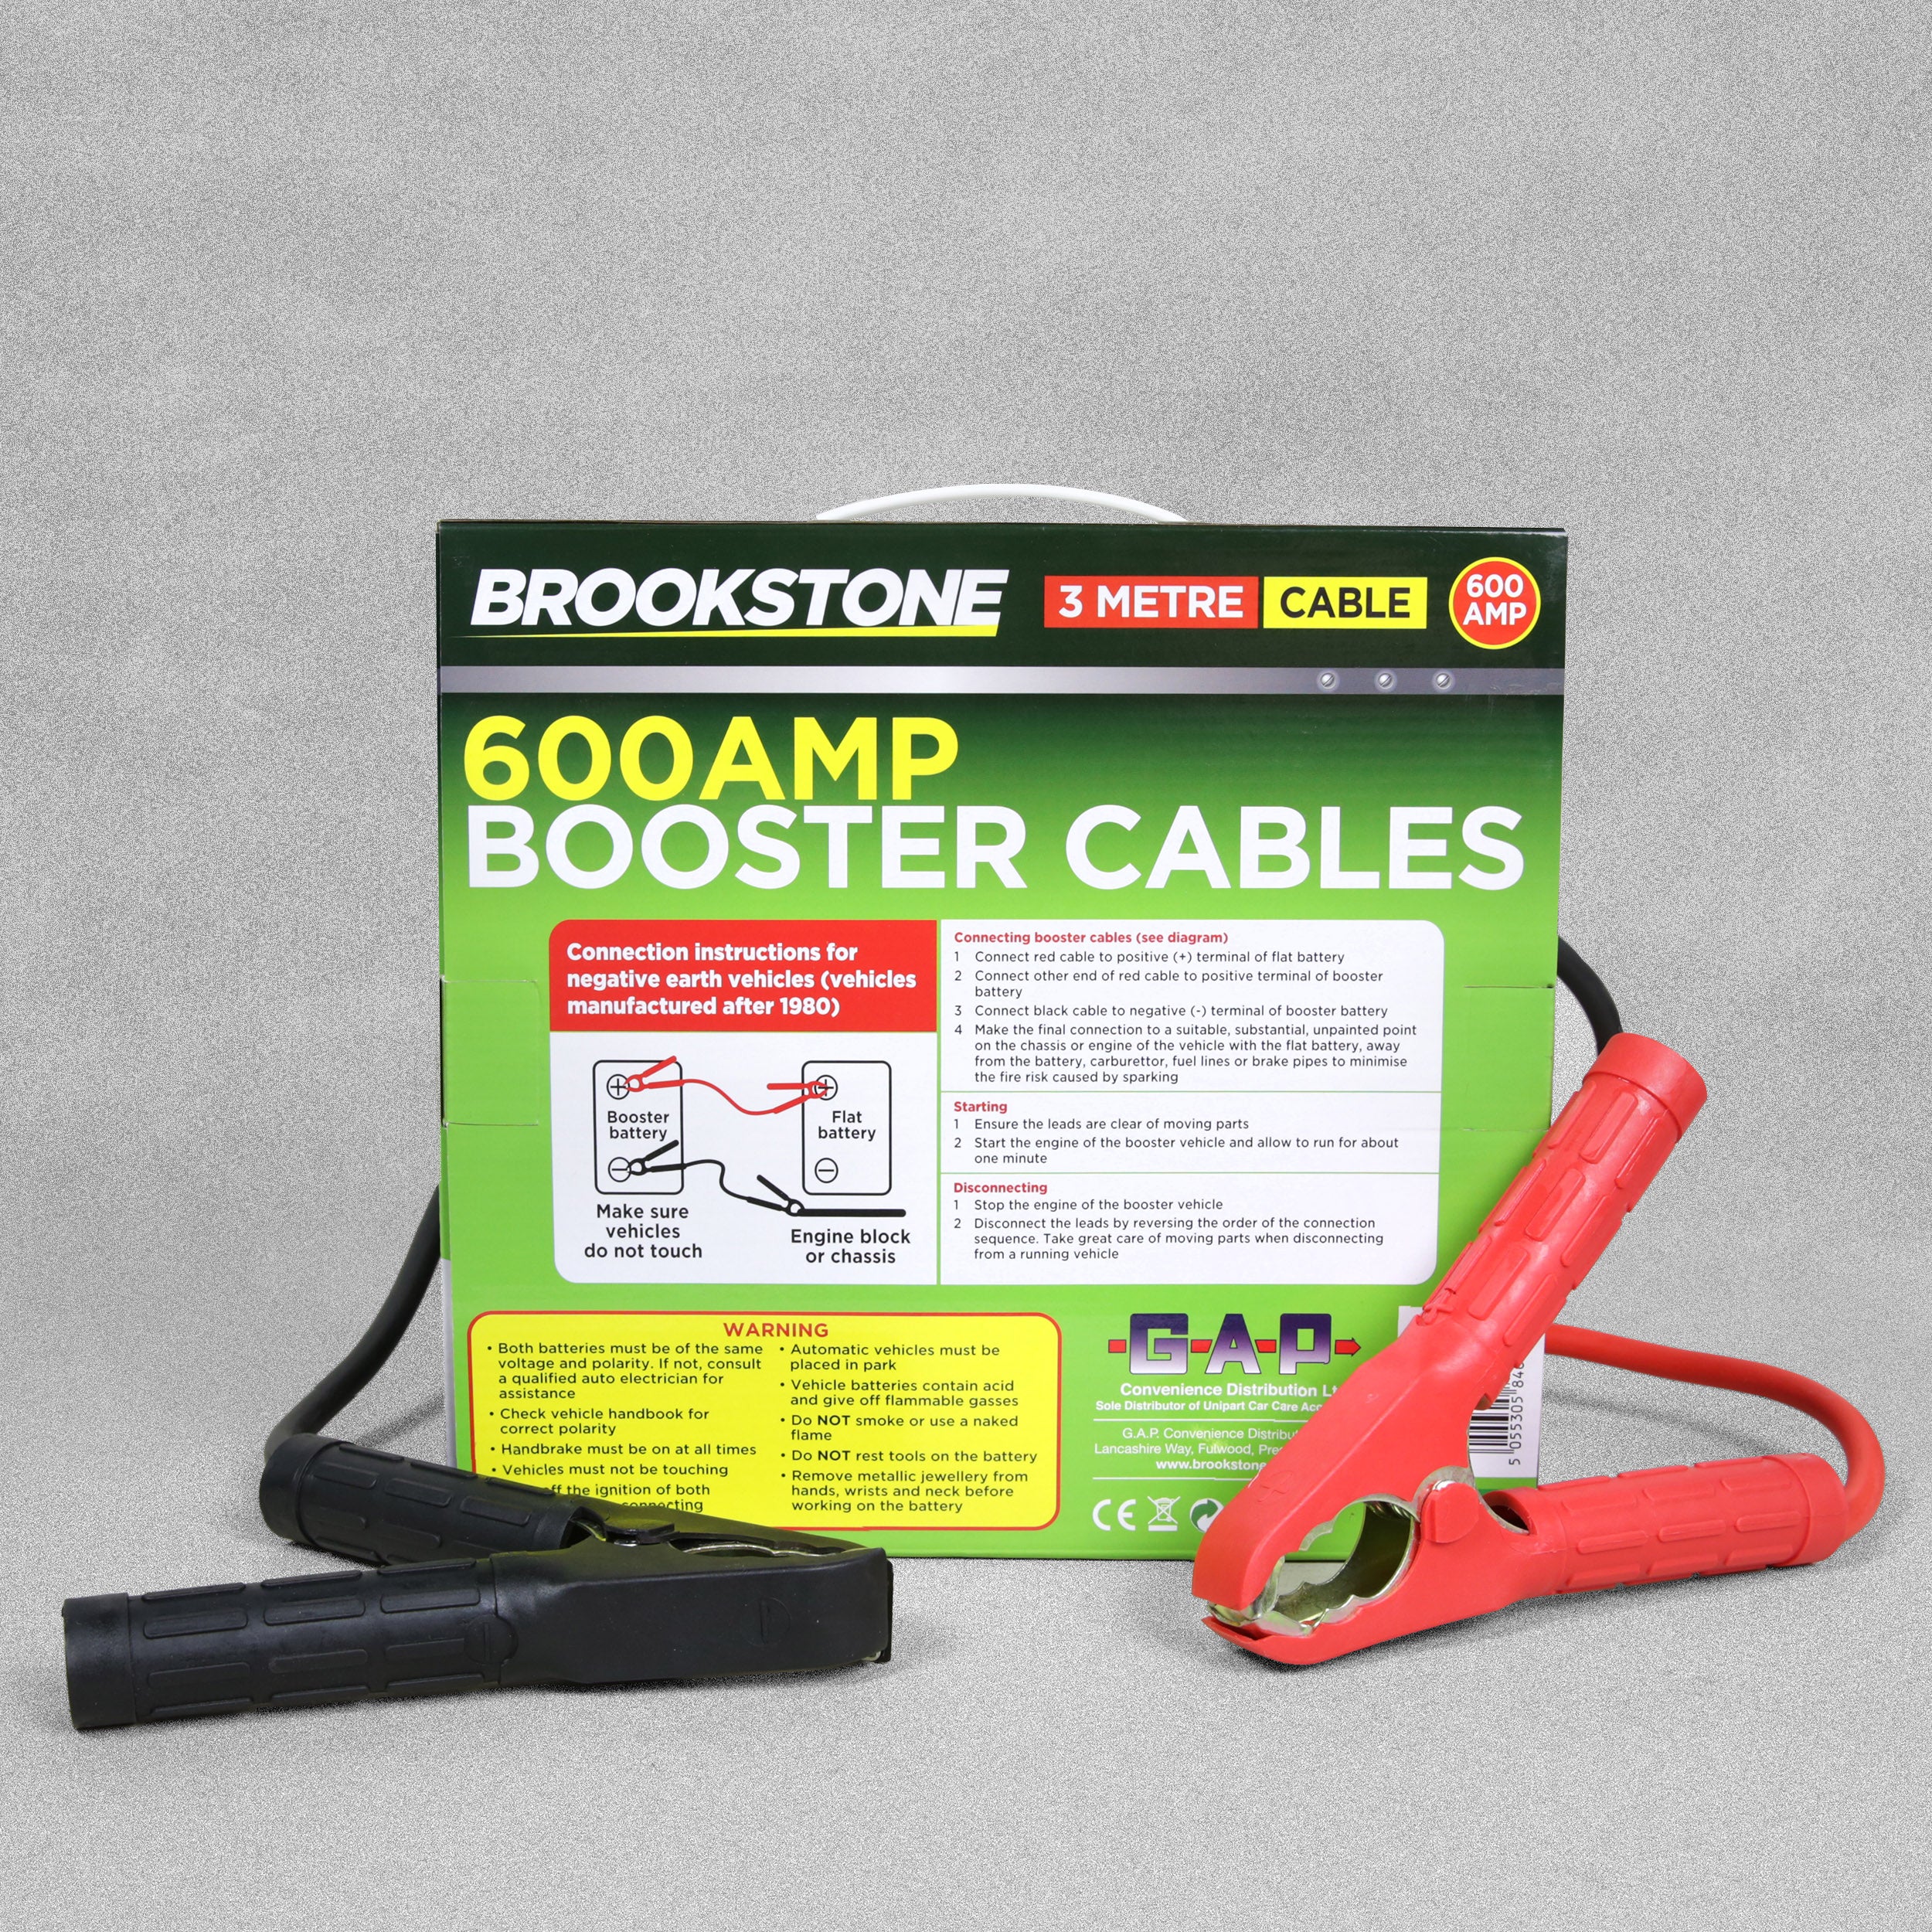 Brookstone 600 AMP Booster Cables (Jump Leads) - 3 Metre